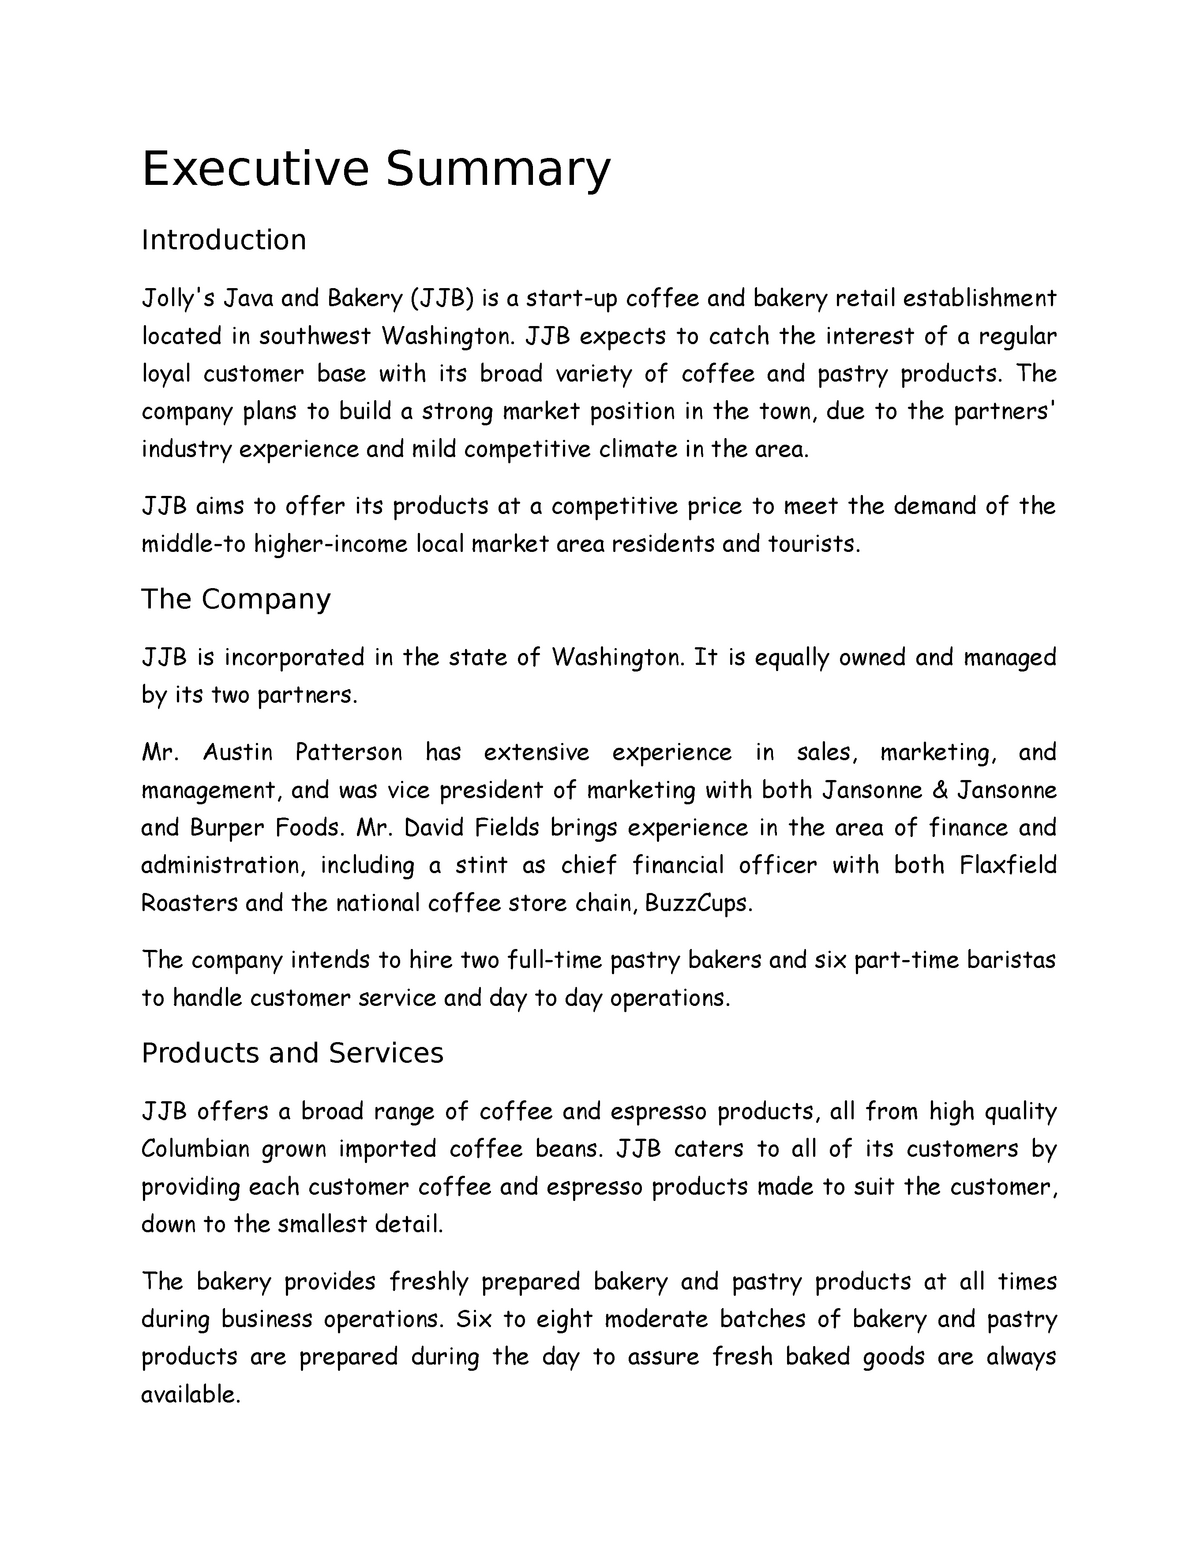 executive summary for restaurant business plan example